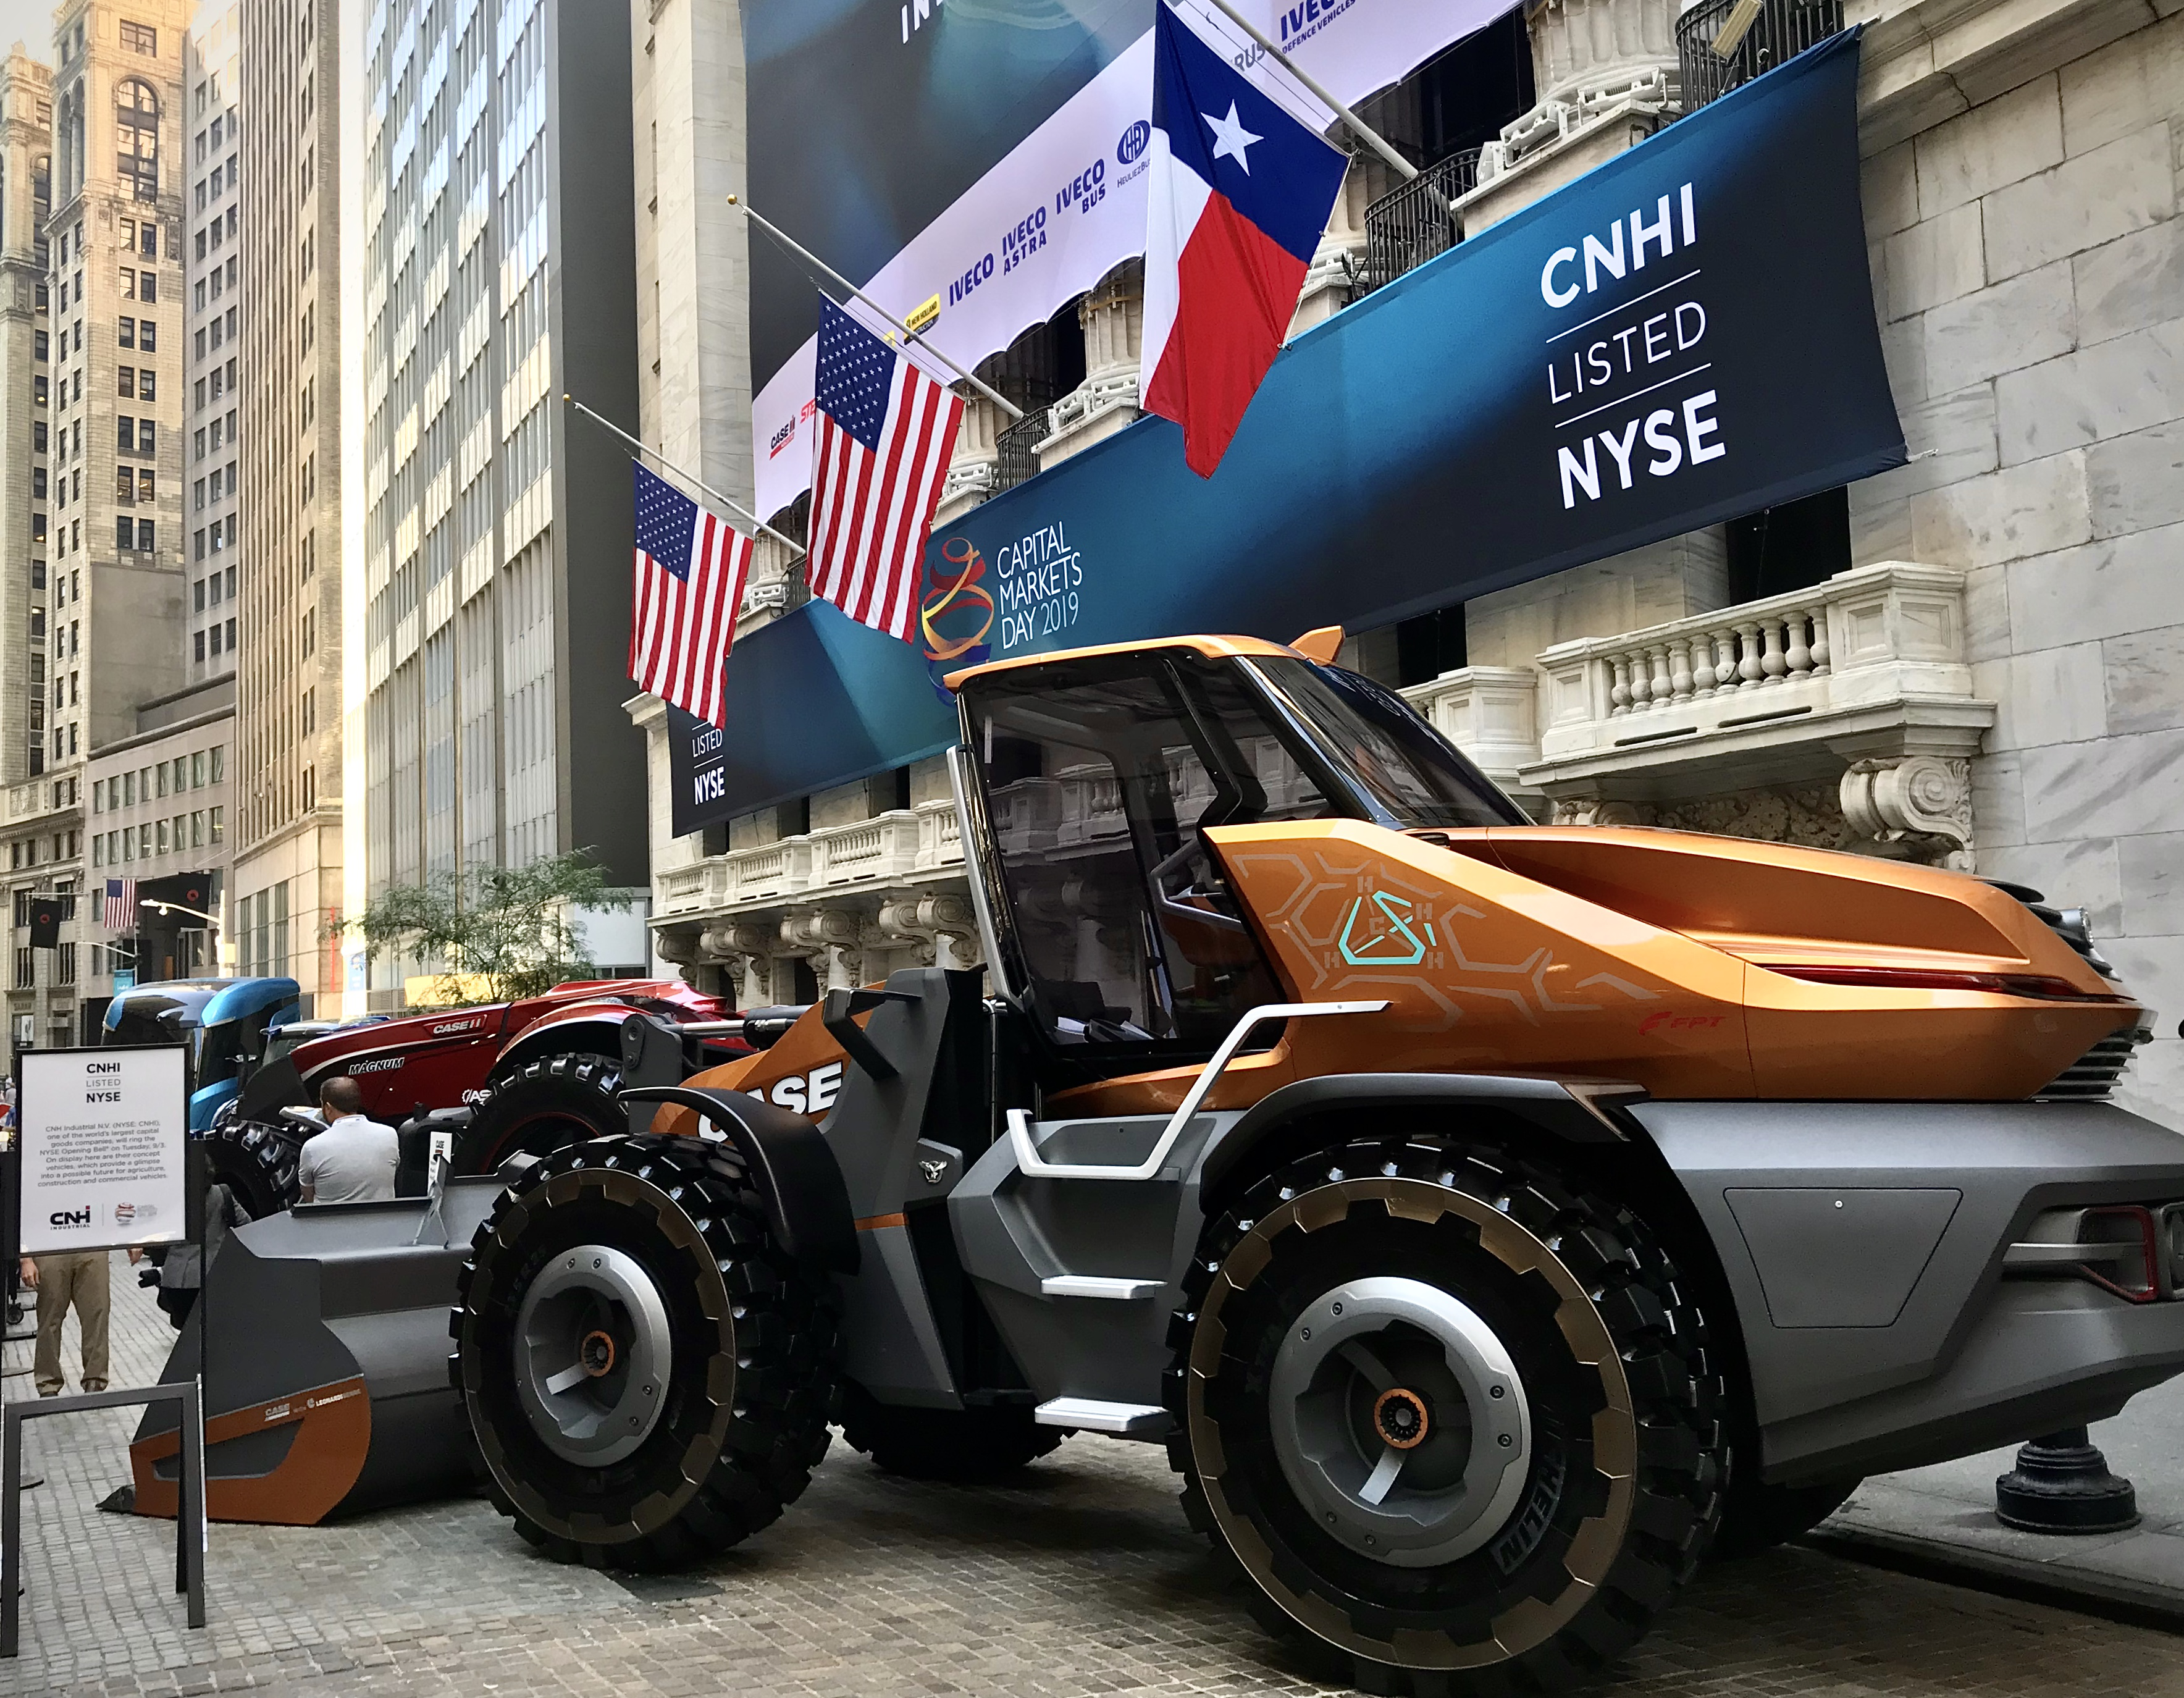 CNH Industrial listed on NYSE banner and Case CE's Tetra concept loader outside of the New York Stock Exchange on Wall Street